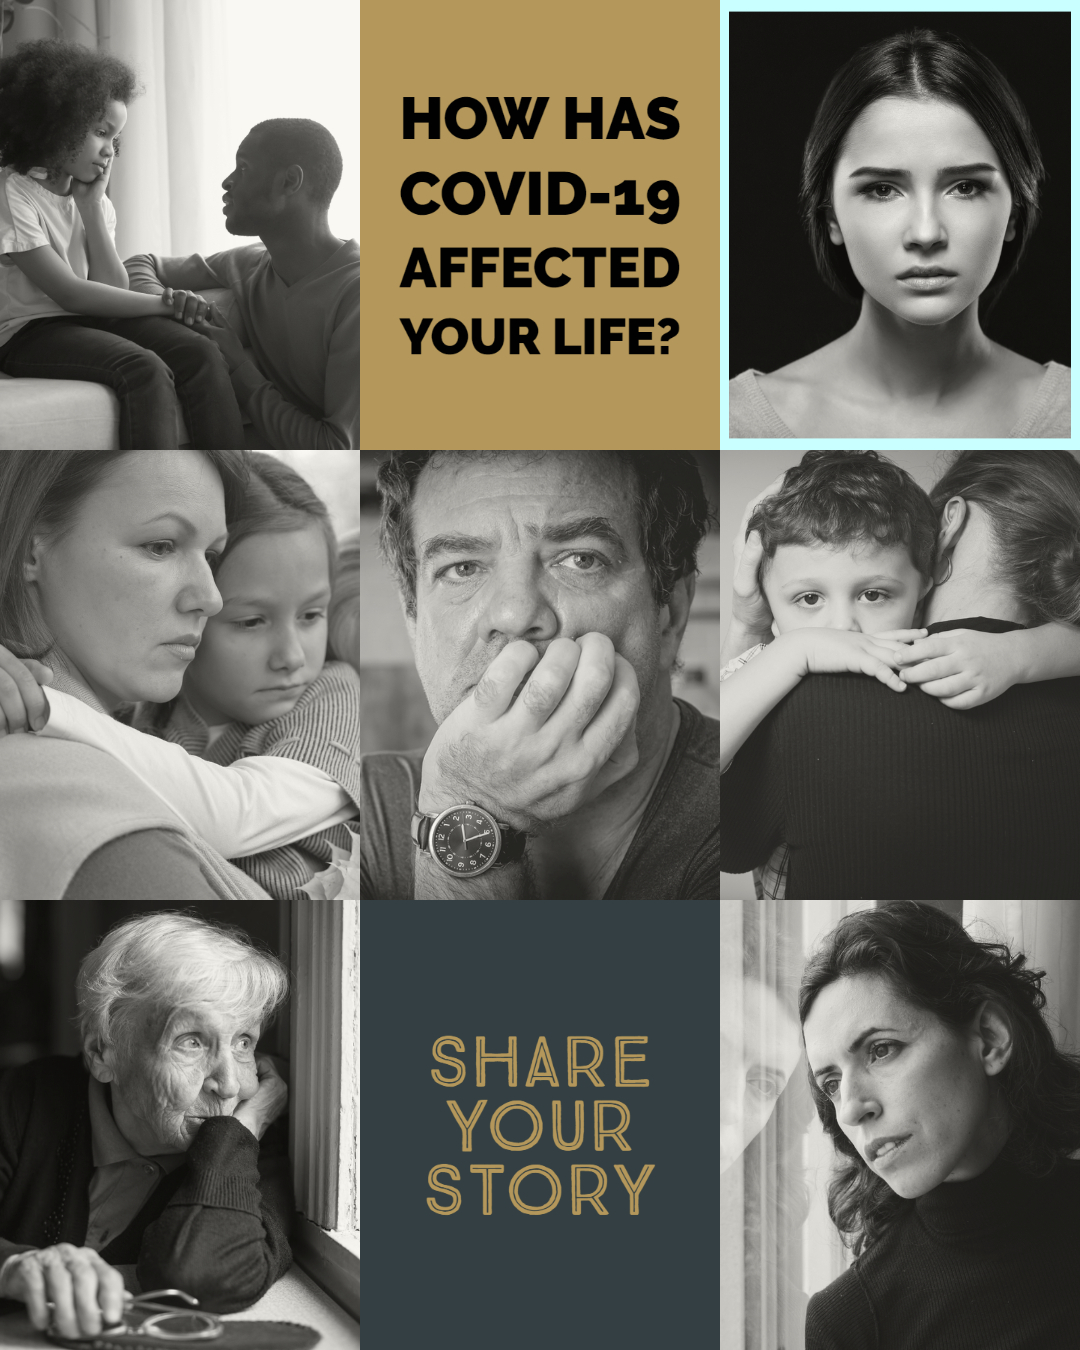 Collage of diverse people holding signs about how COVID-19 has impacted their lives.